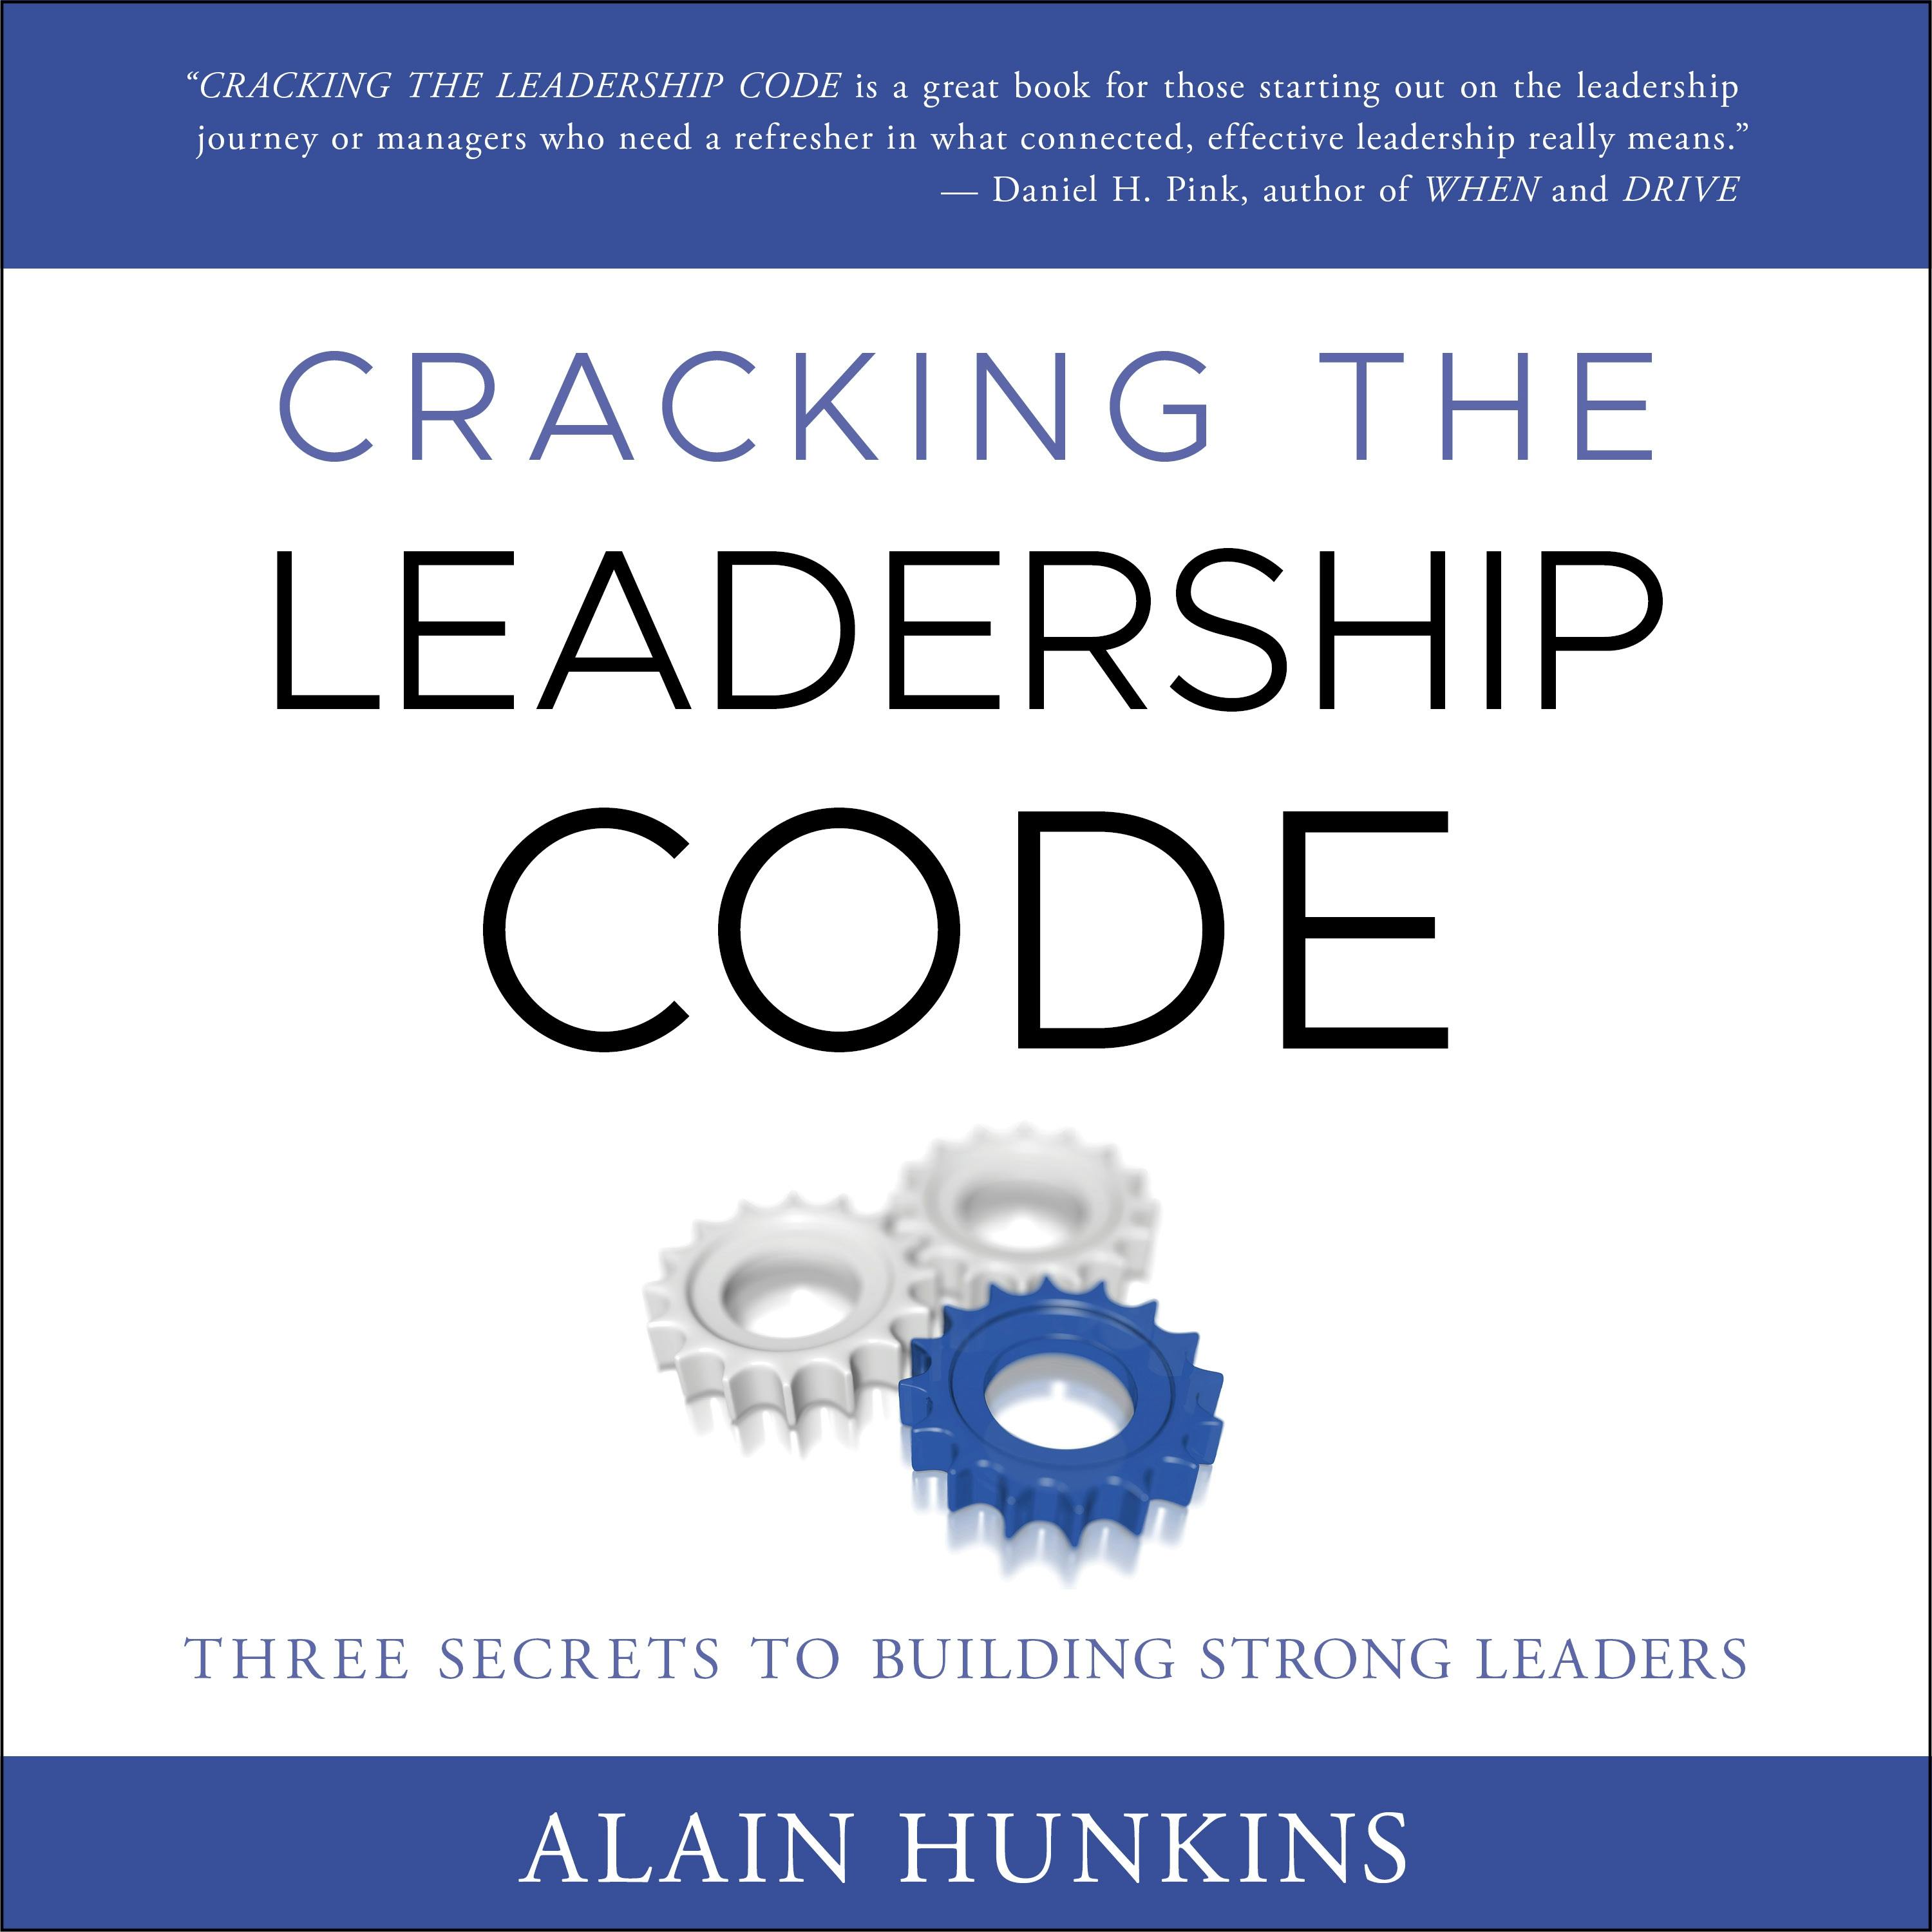 Cracking the Leadership Code: Three Secrets to Building Strong Leaders - Alain Hunkins